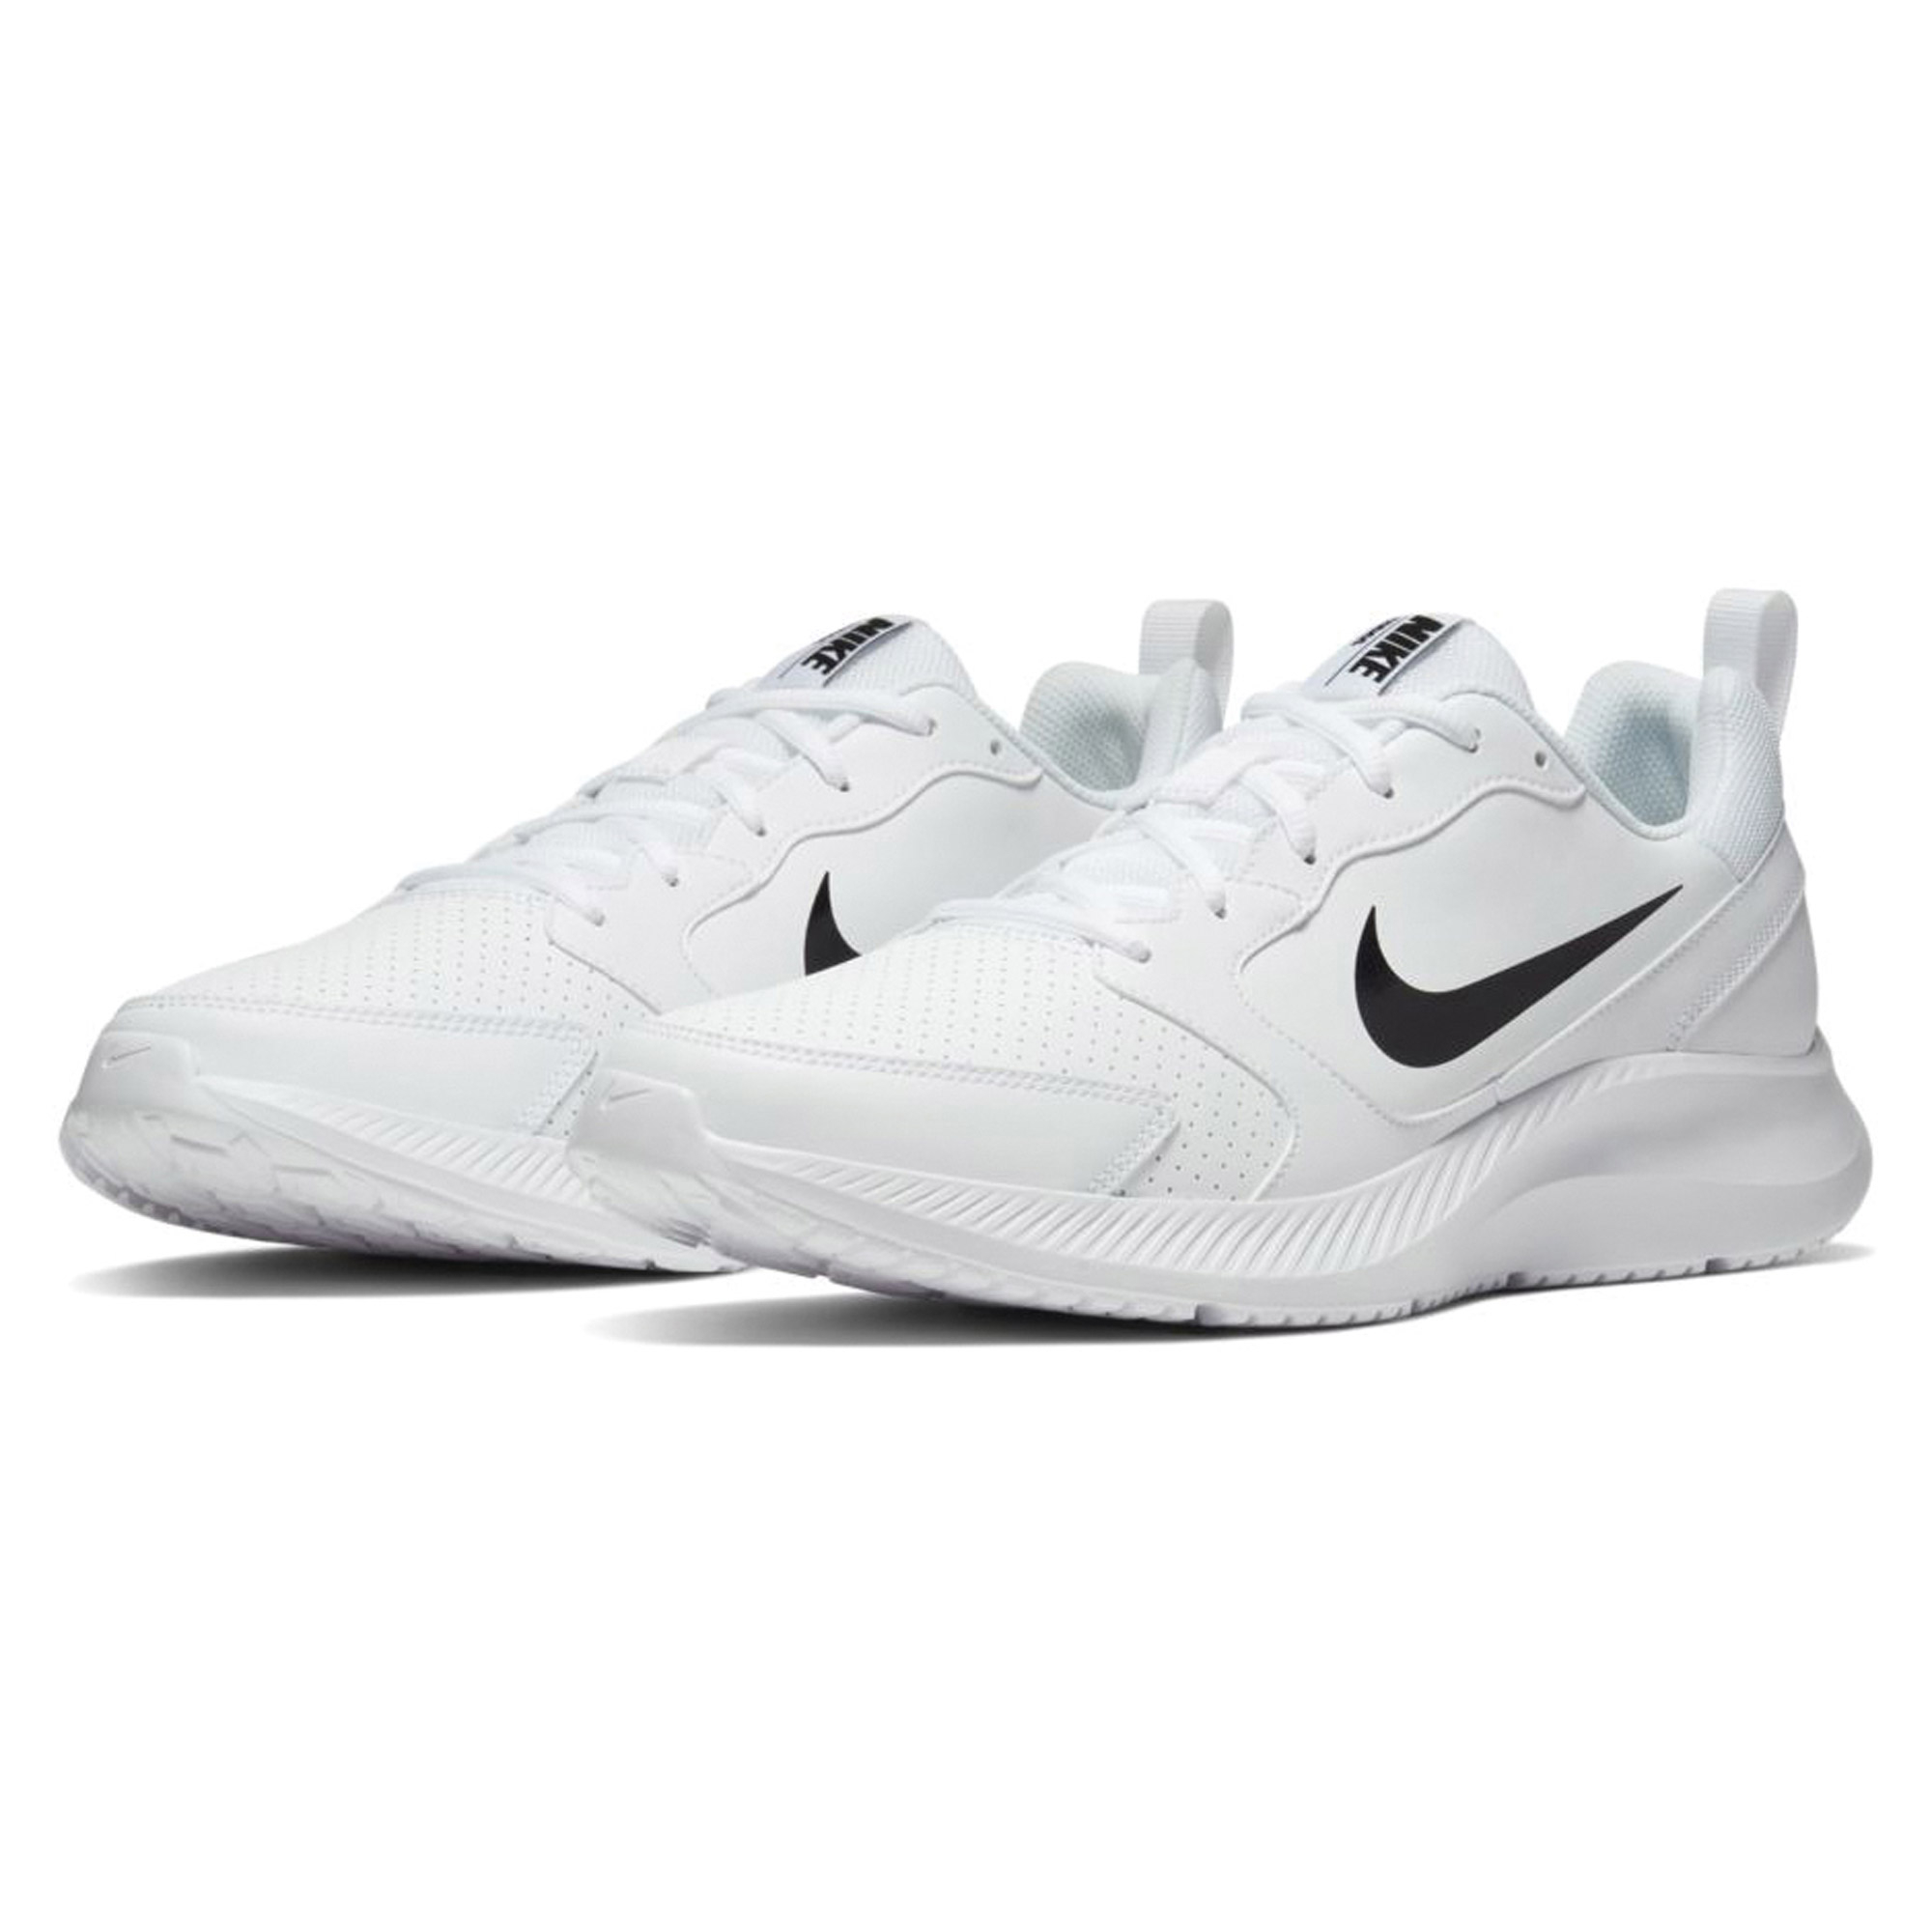 Chaussures de running Nike Todos Homme